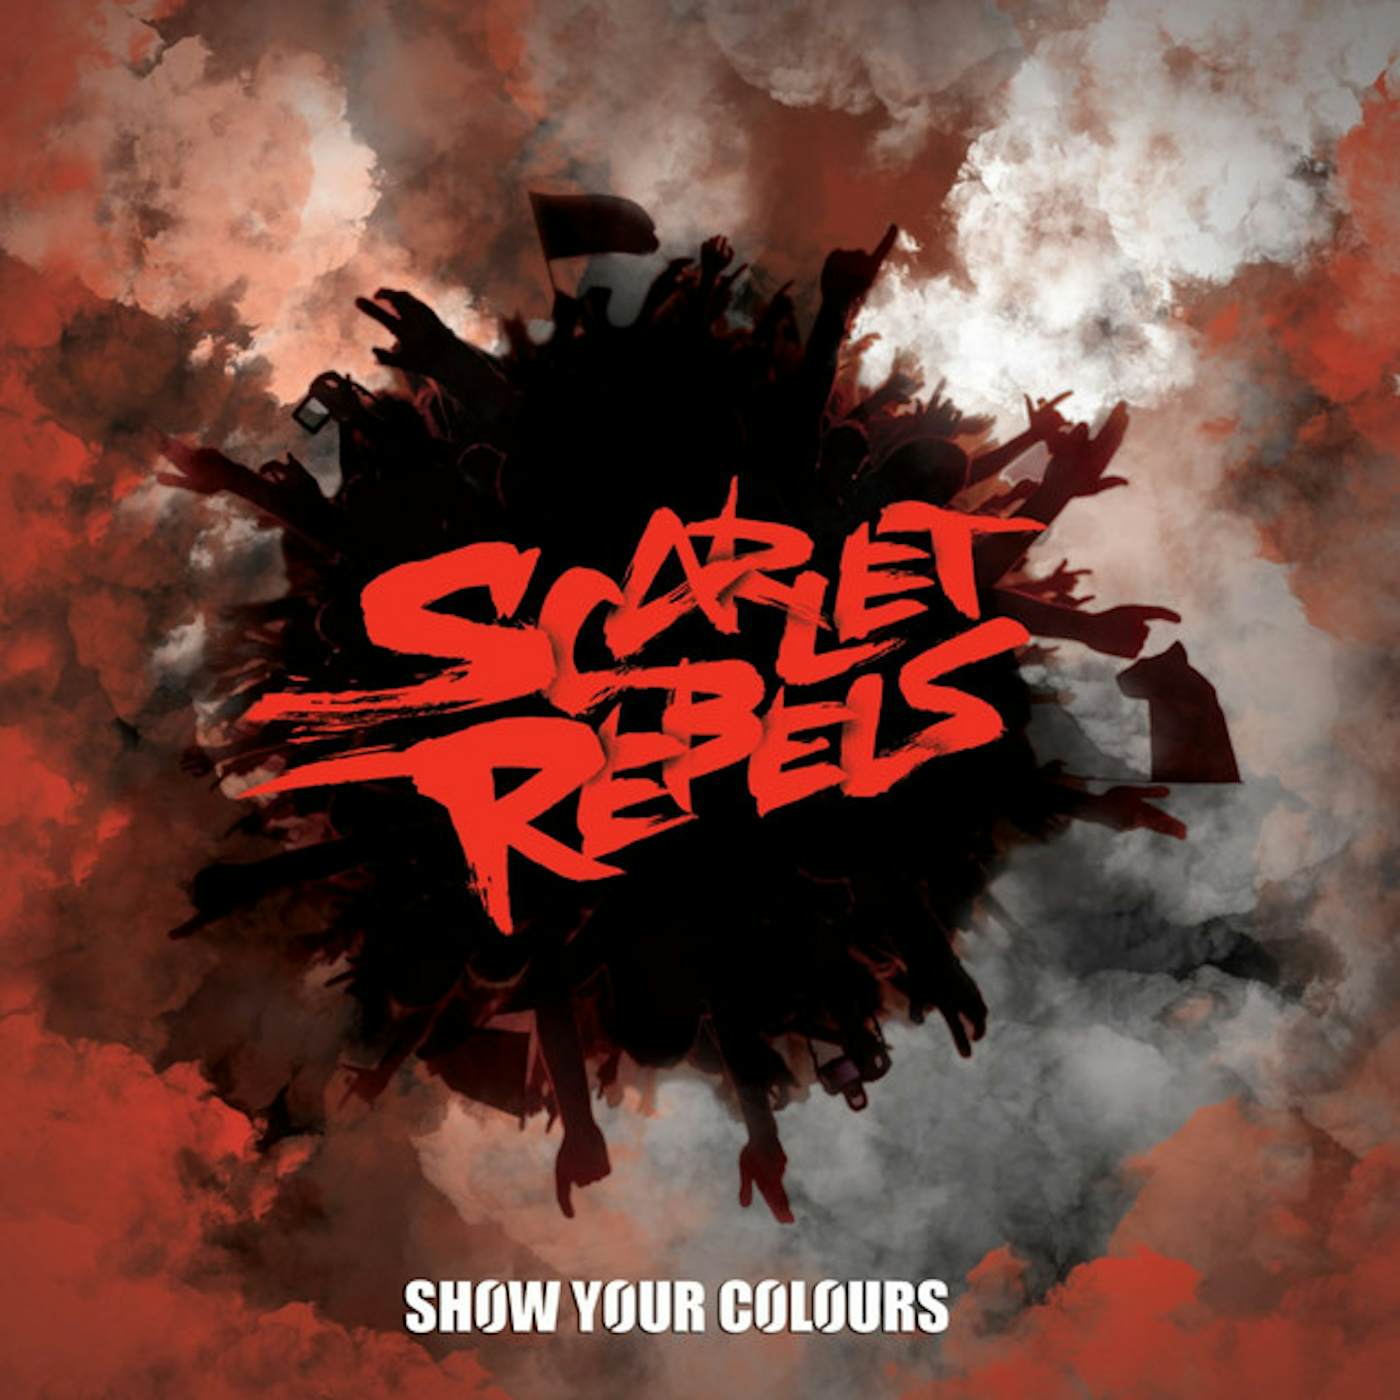 Scarlet Rebels SHOW YOUR COLOURS CD